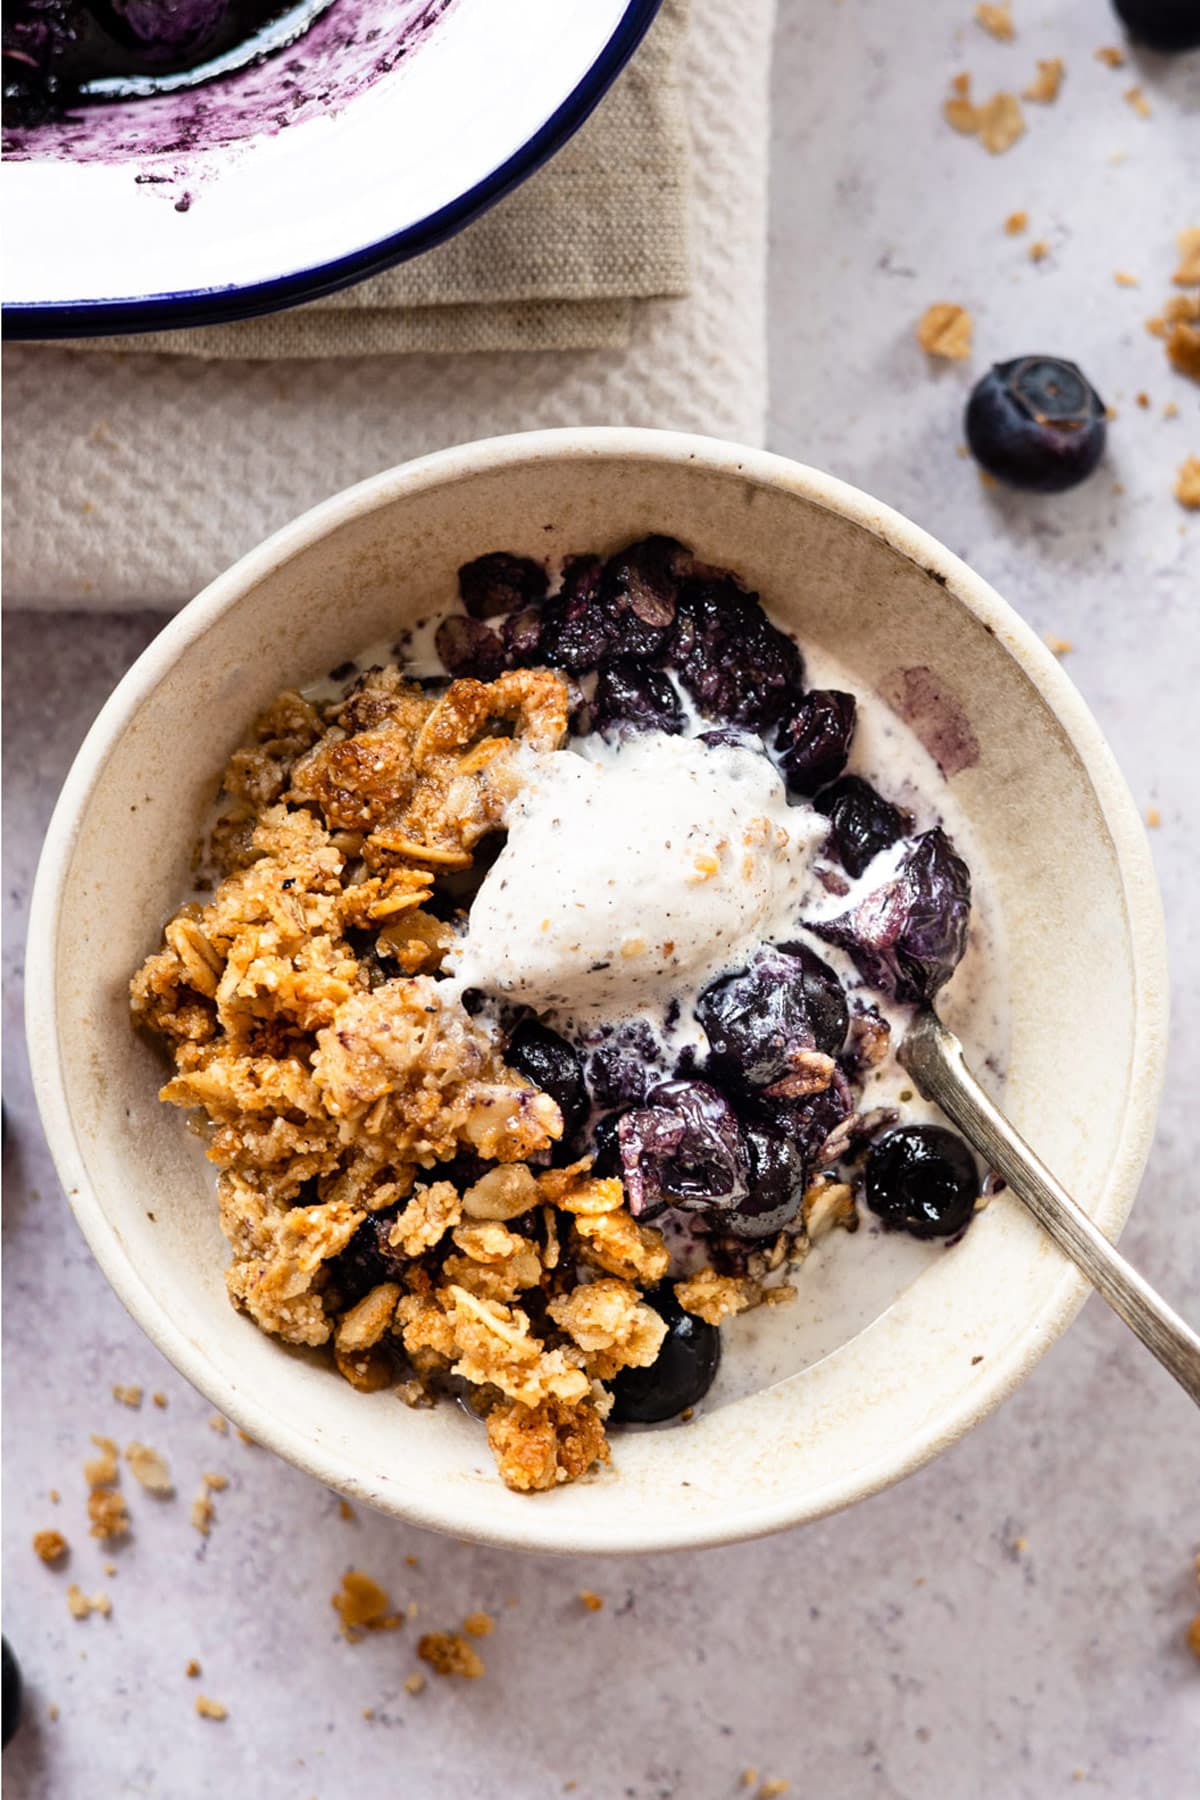 Easy Blueberry Crumble   Eating Bird Food